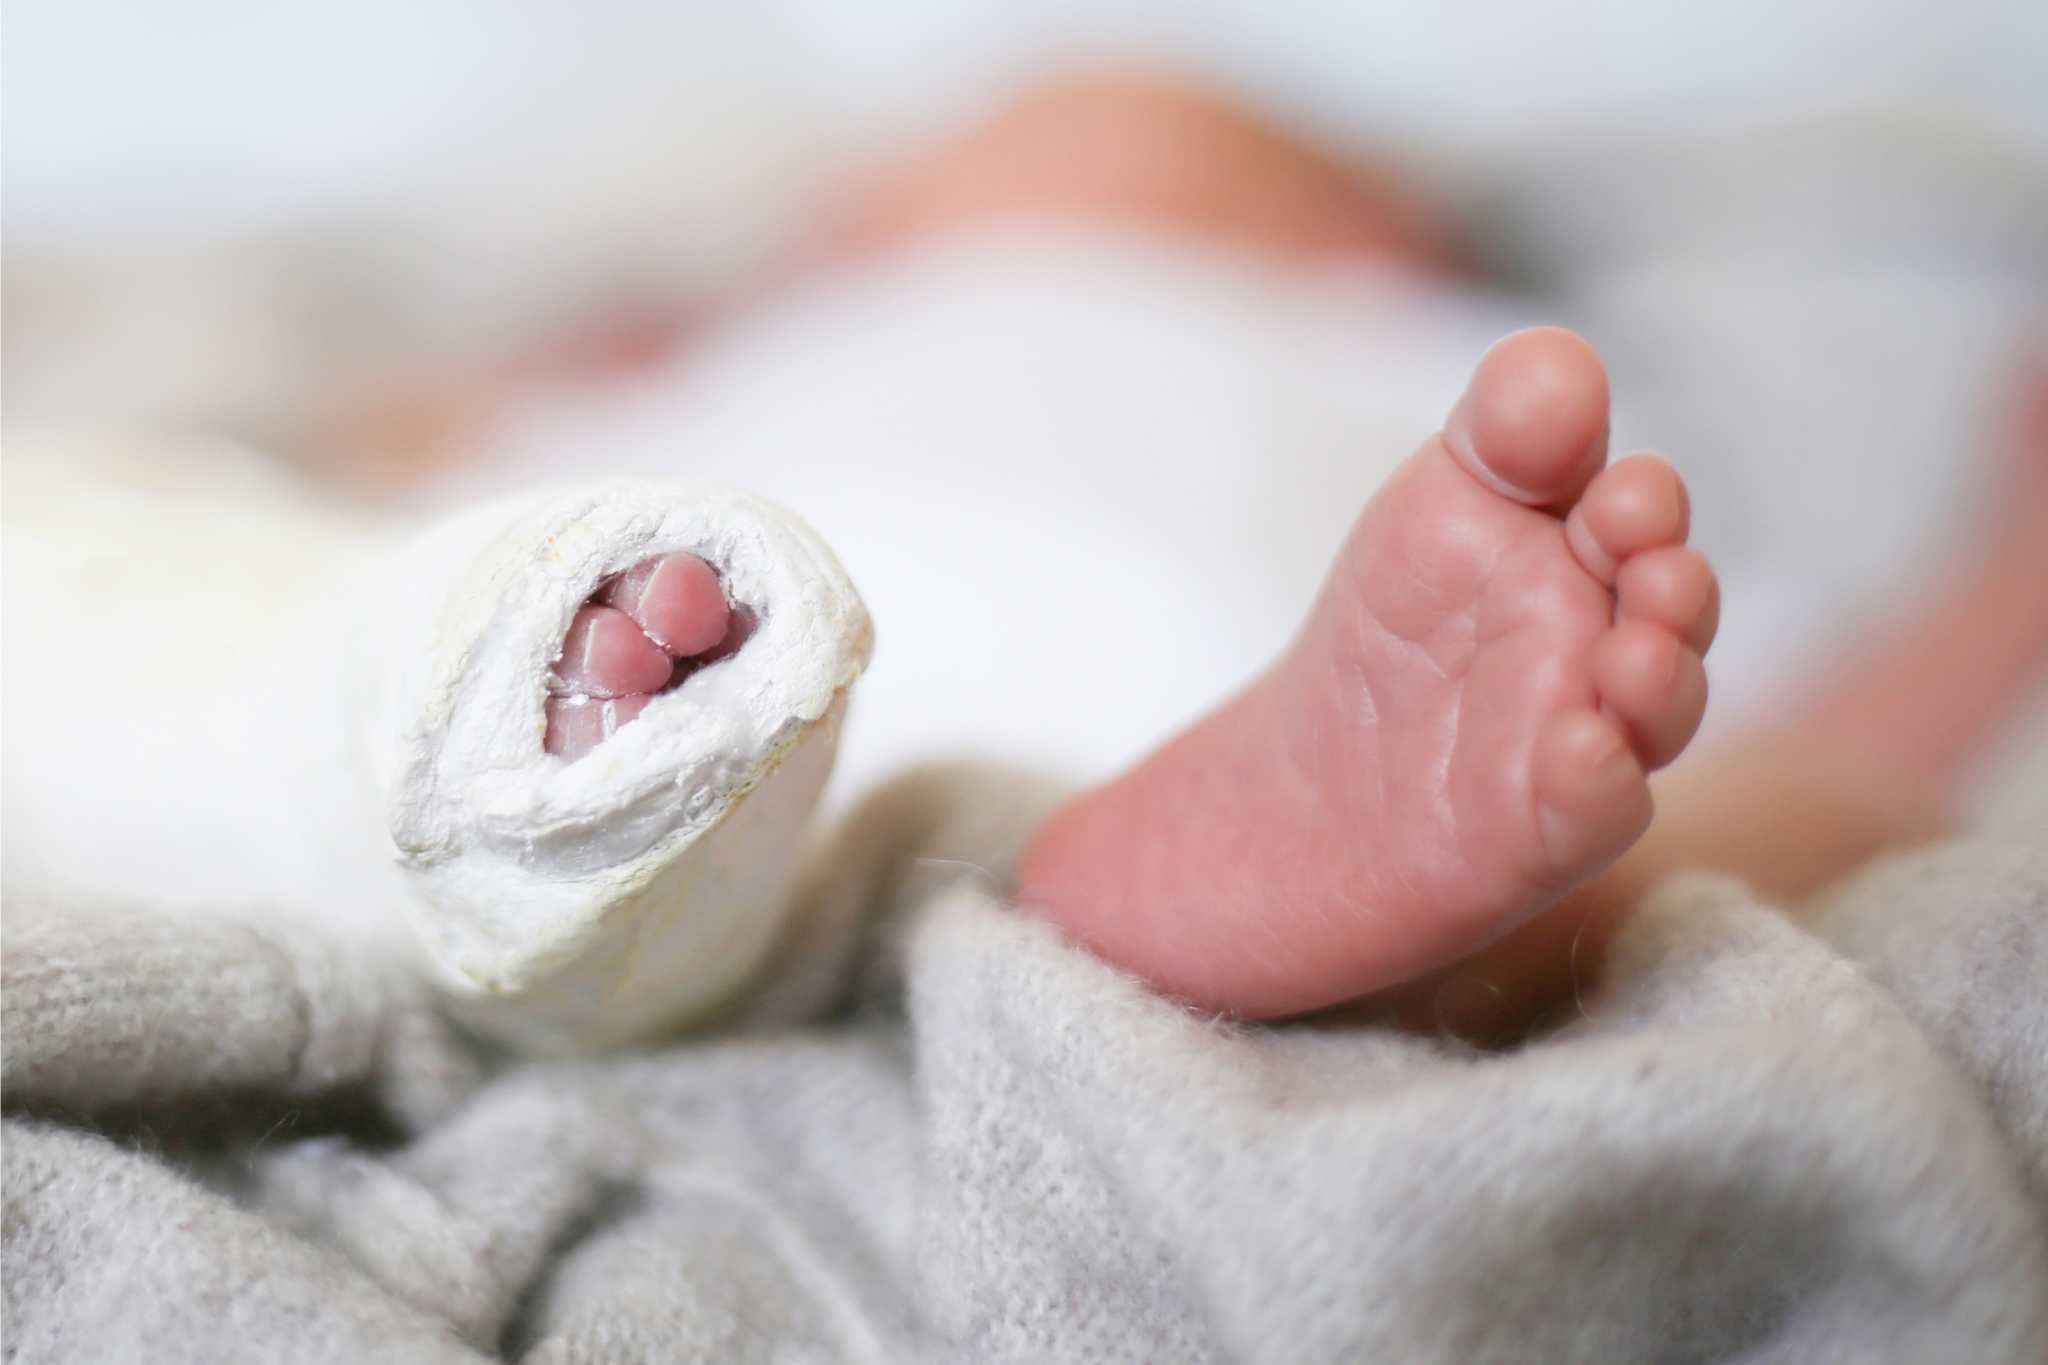 child's feet in a cast